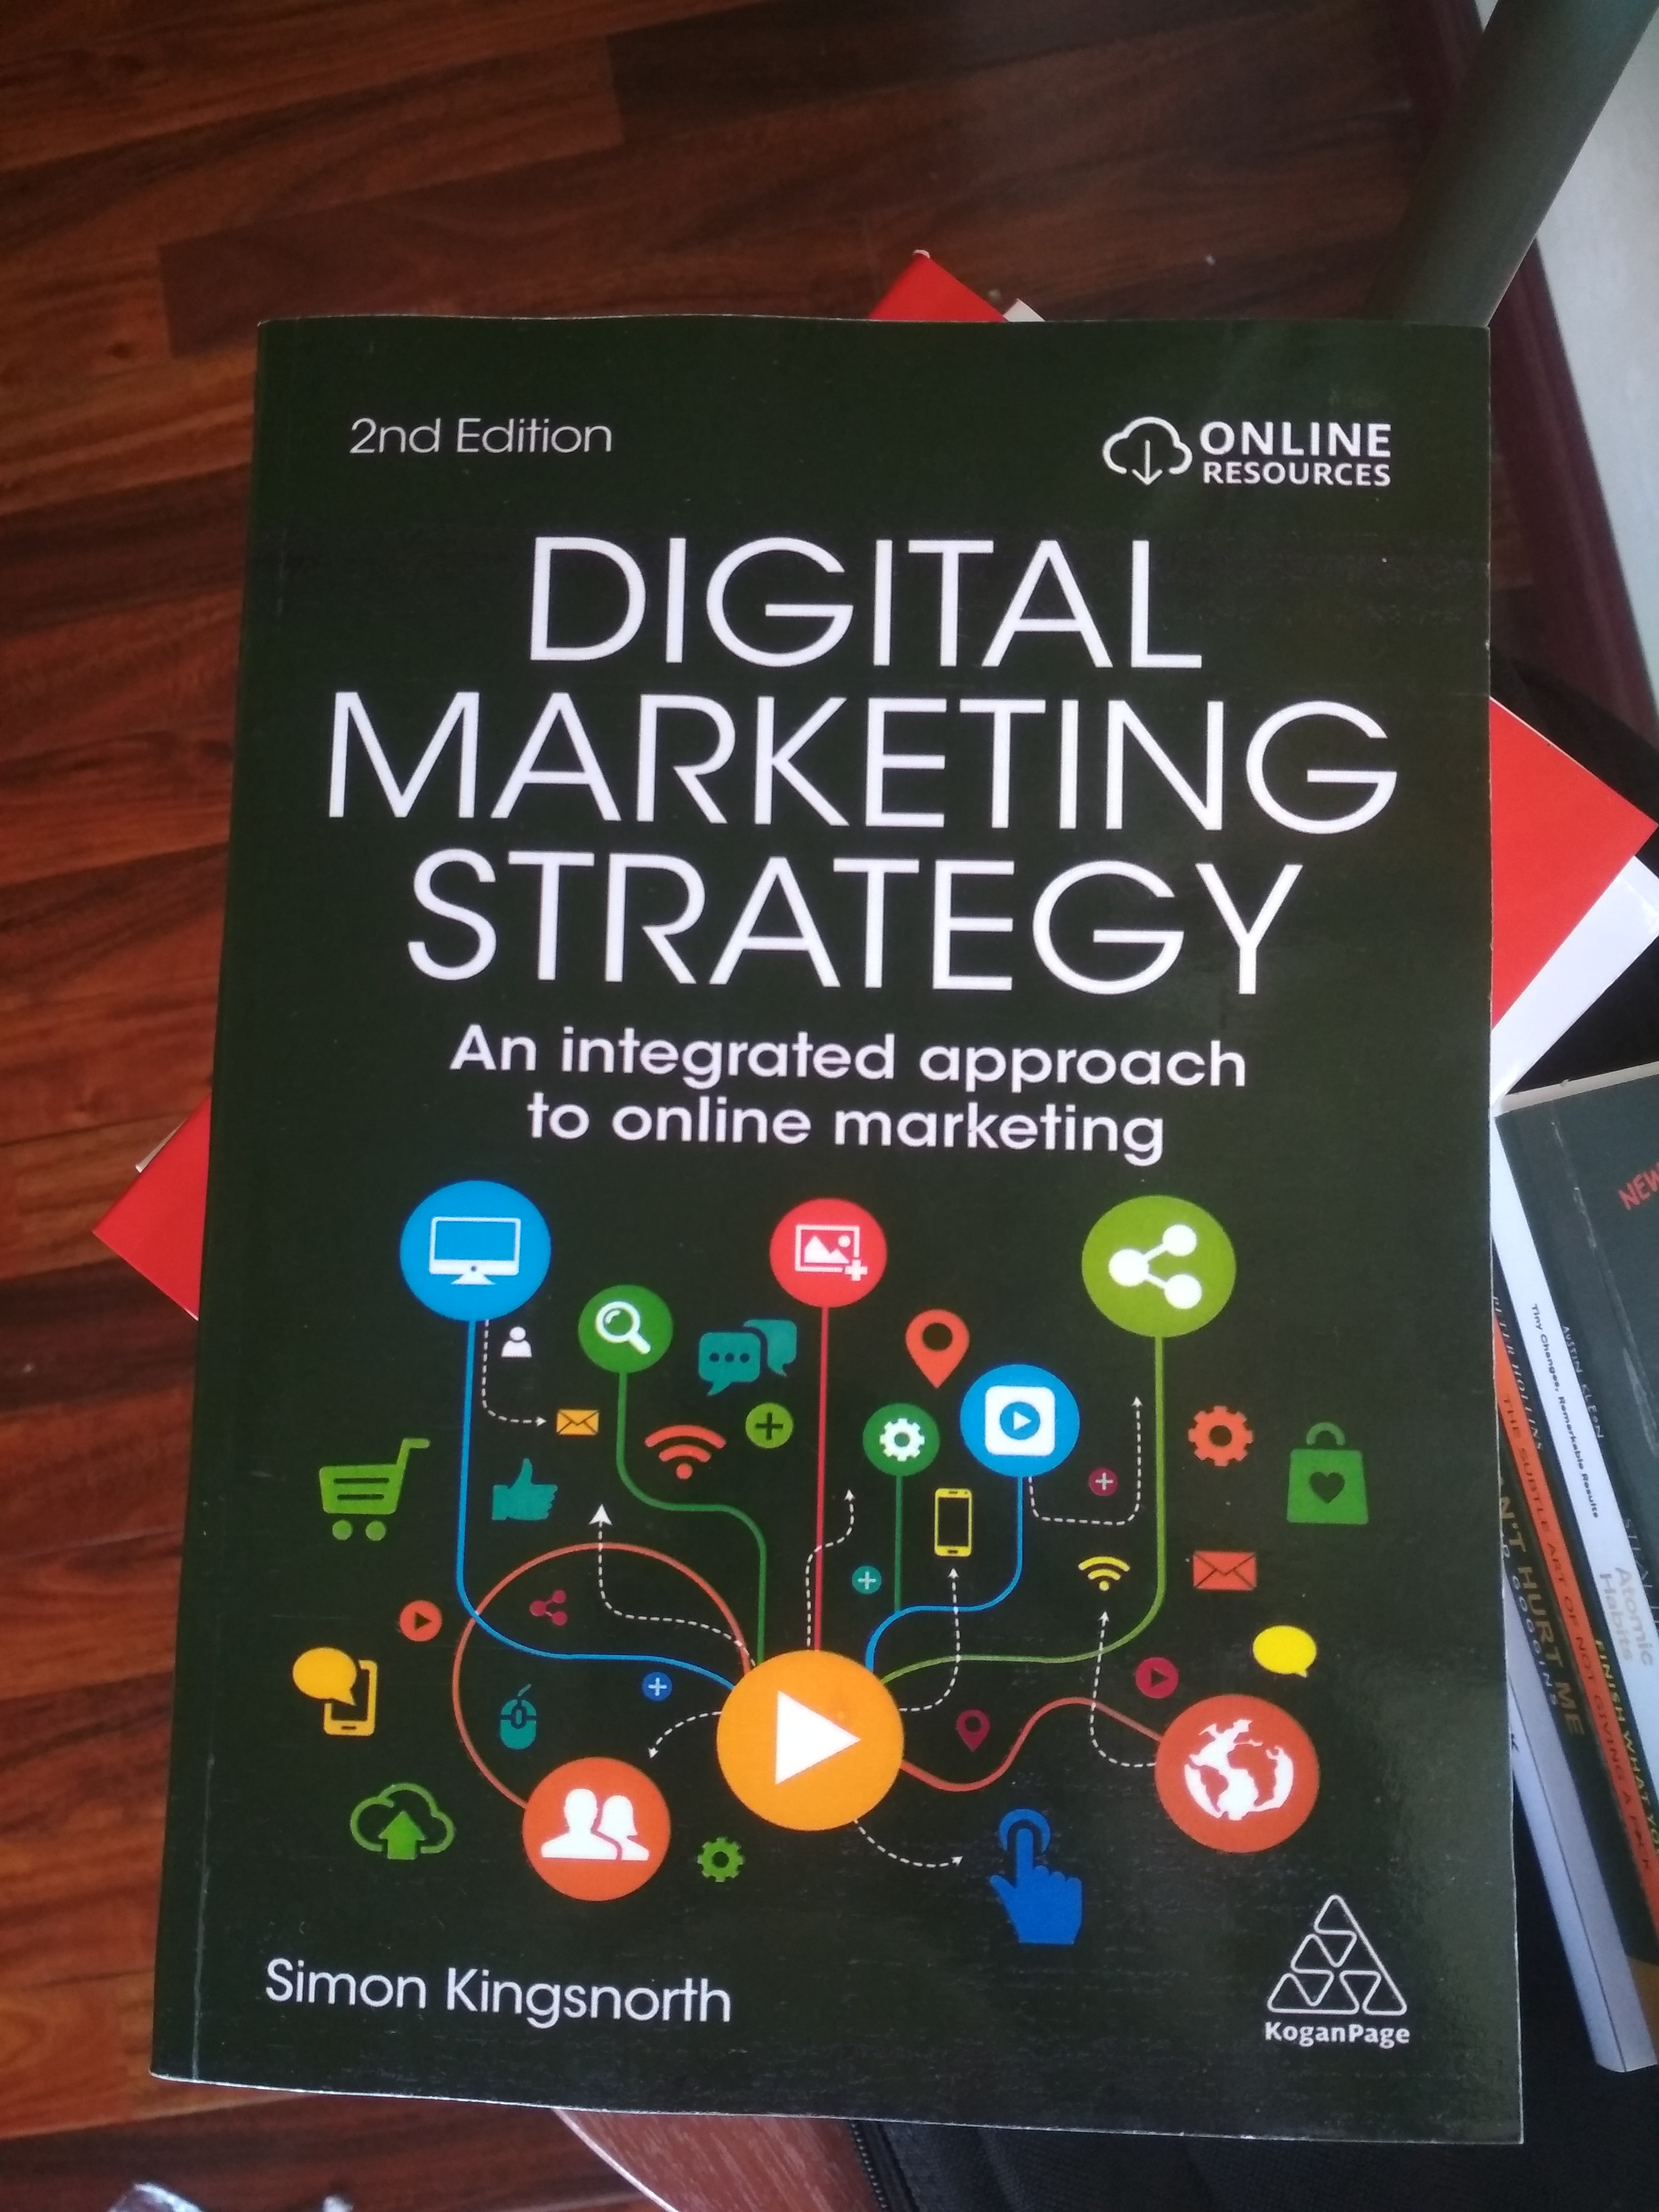 Digital Marketing Strategy: An Integrated Approach to Online